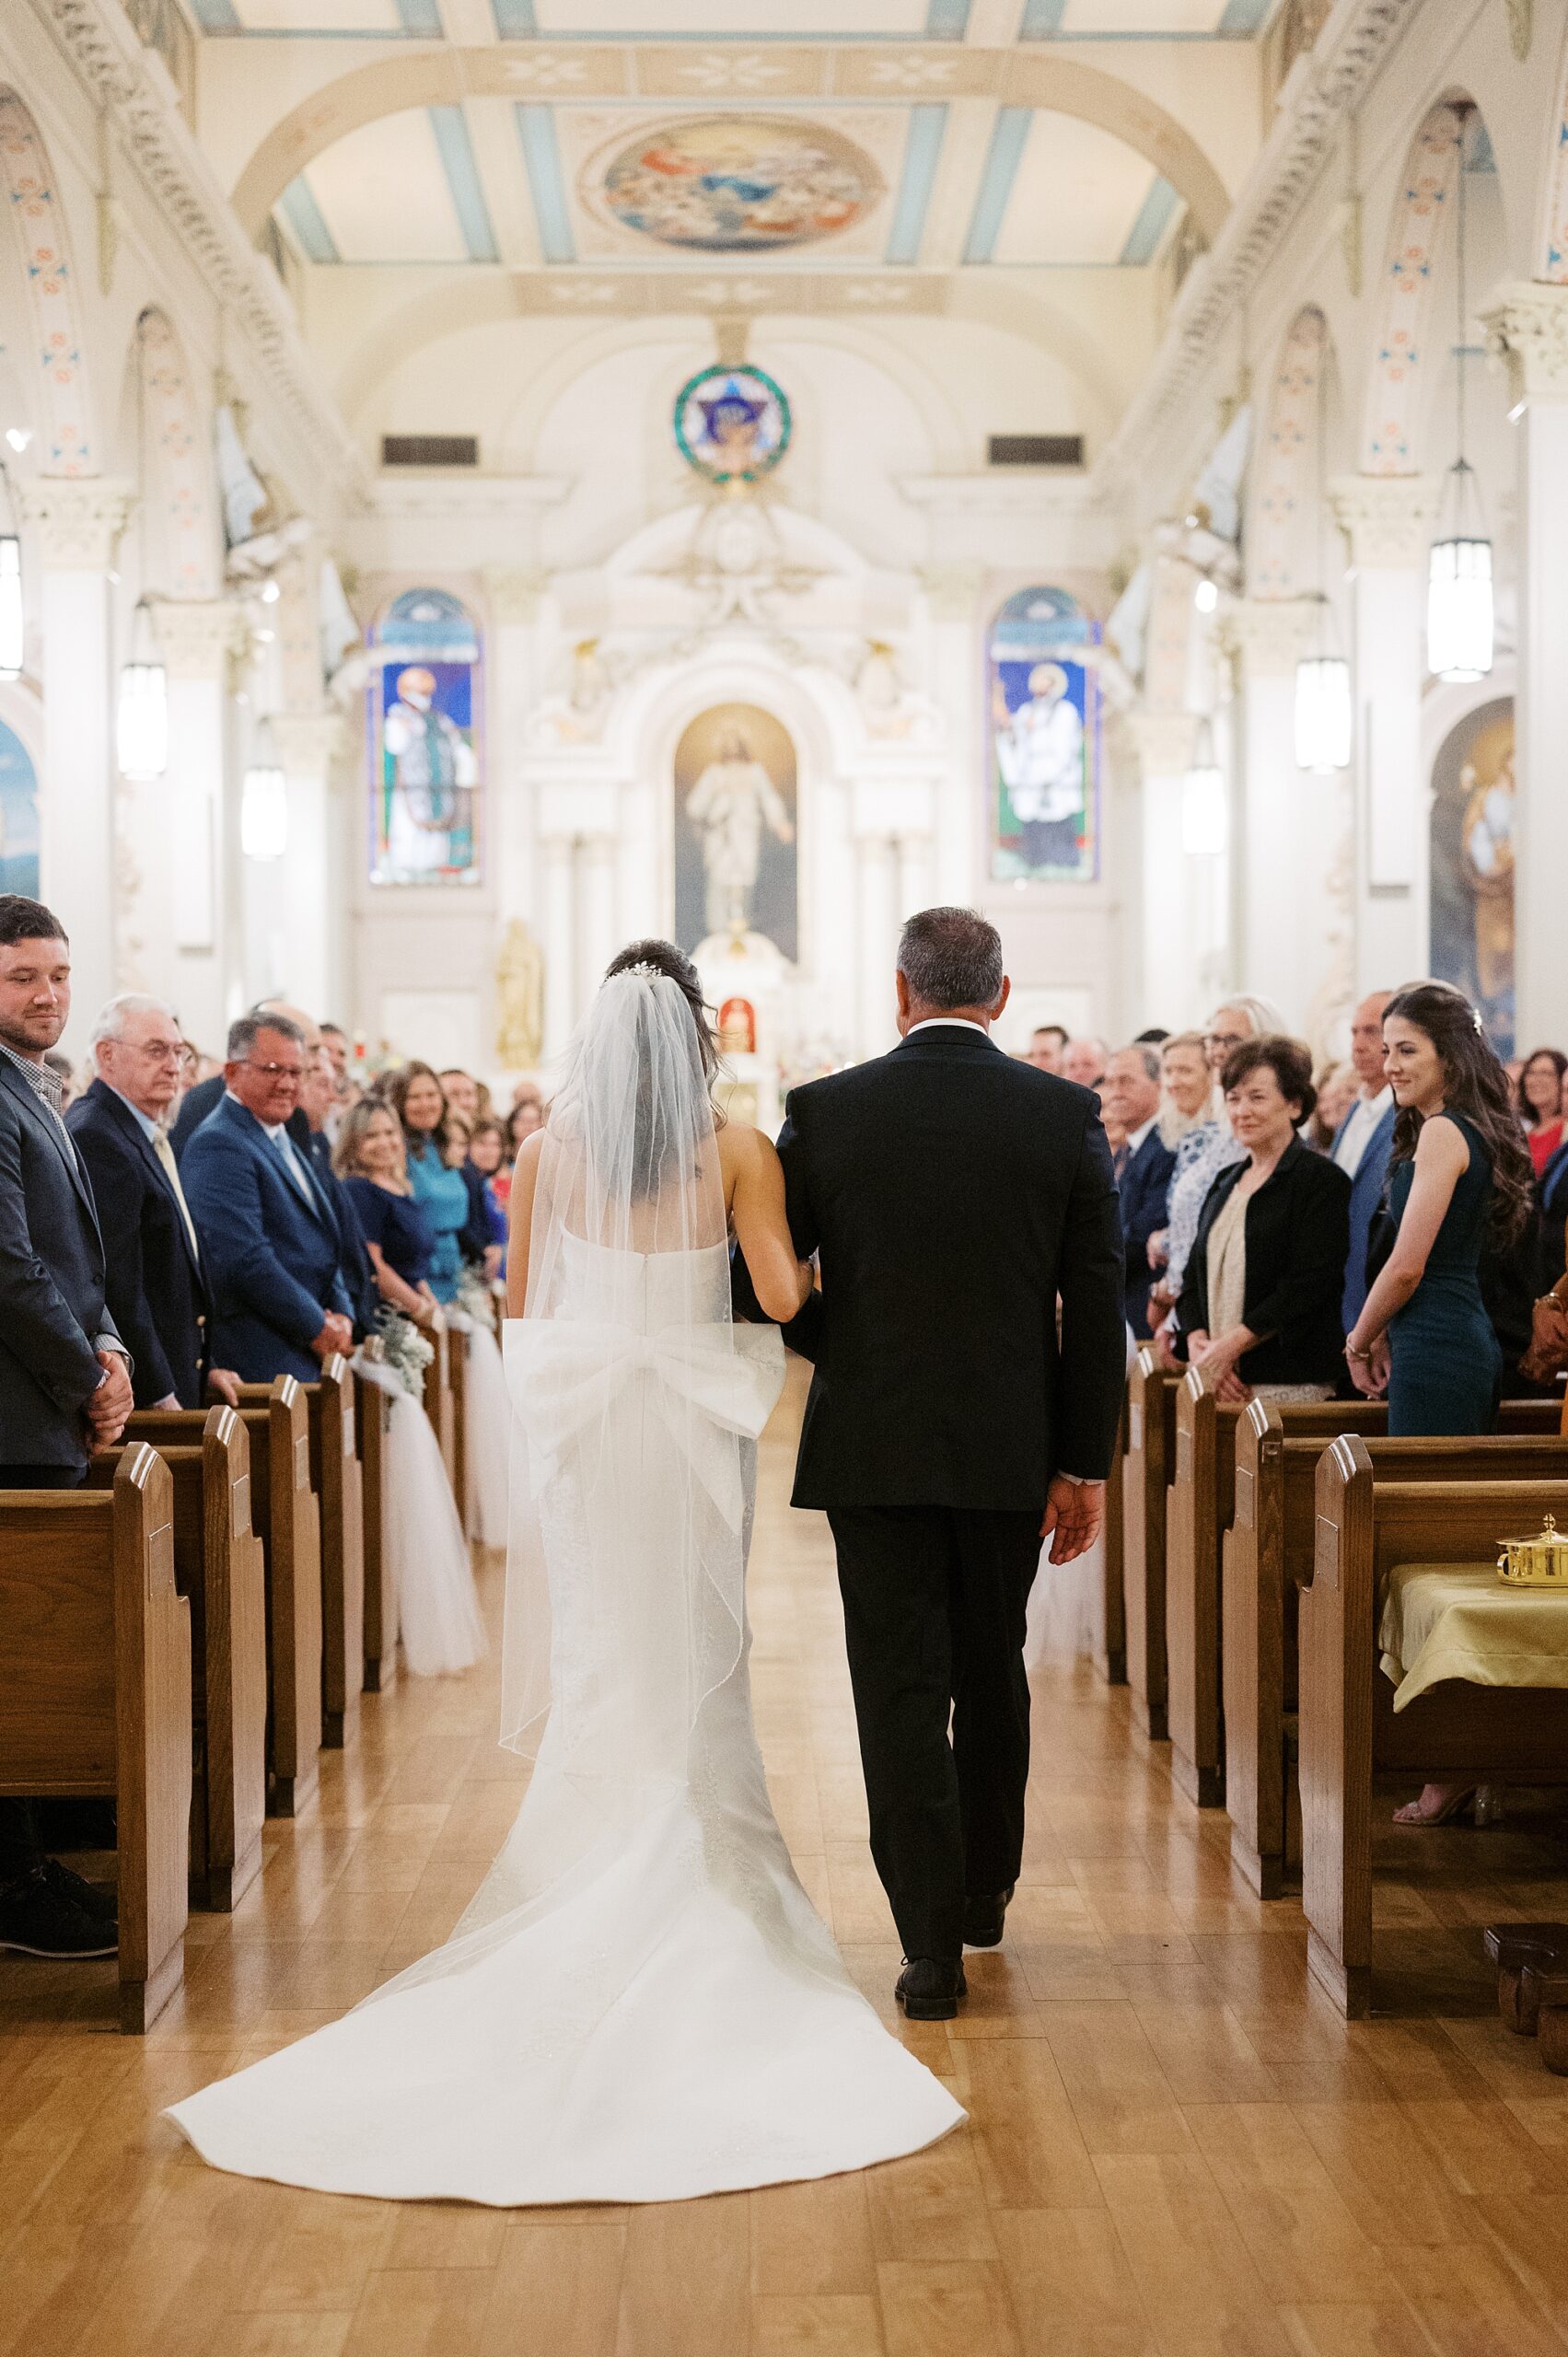 bride walks down aisle with father during traditional catholic wedding ceremony inside St. Charles Borromeo